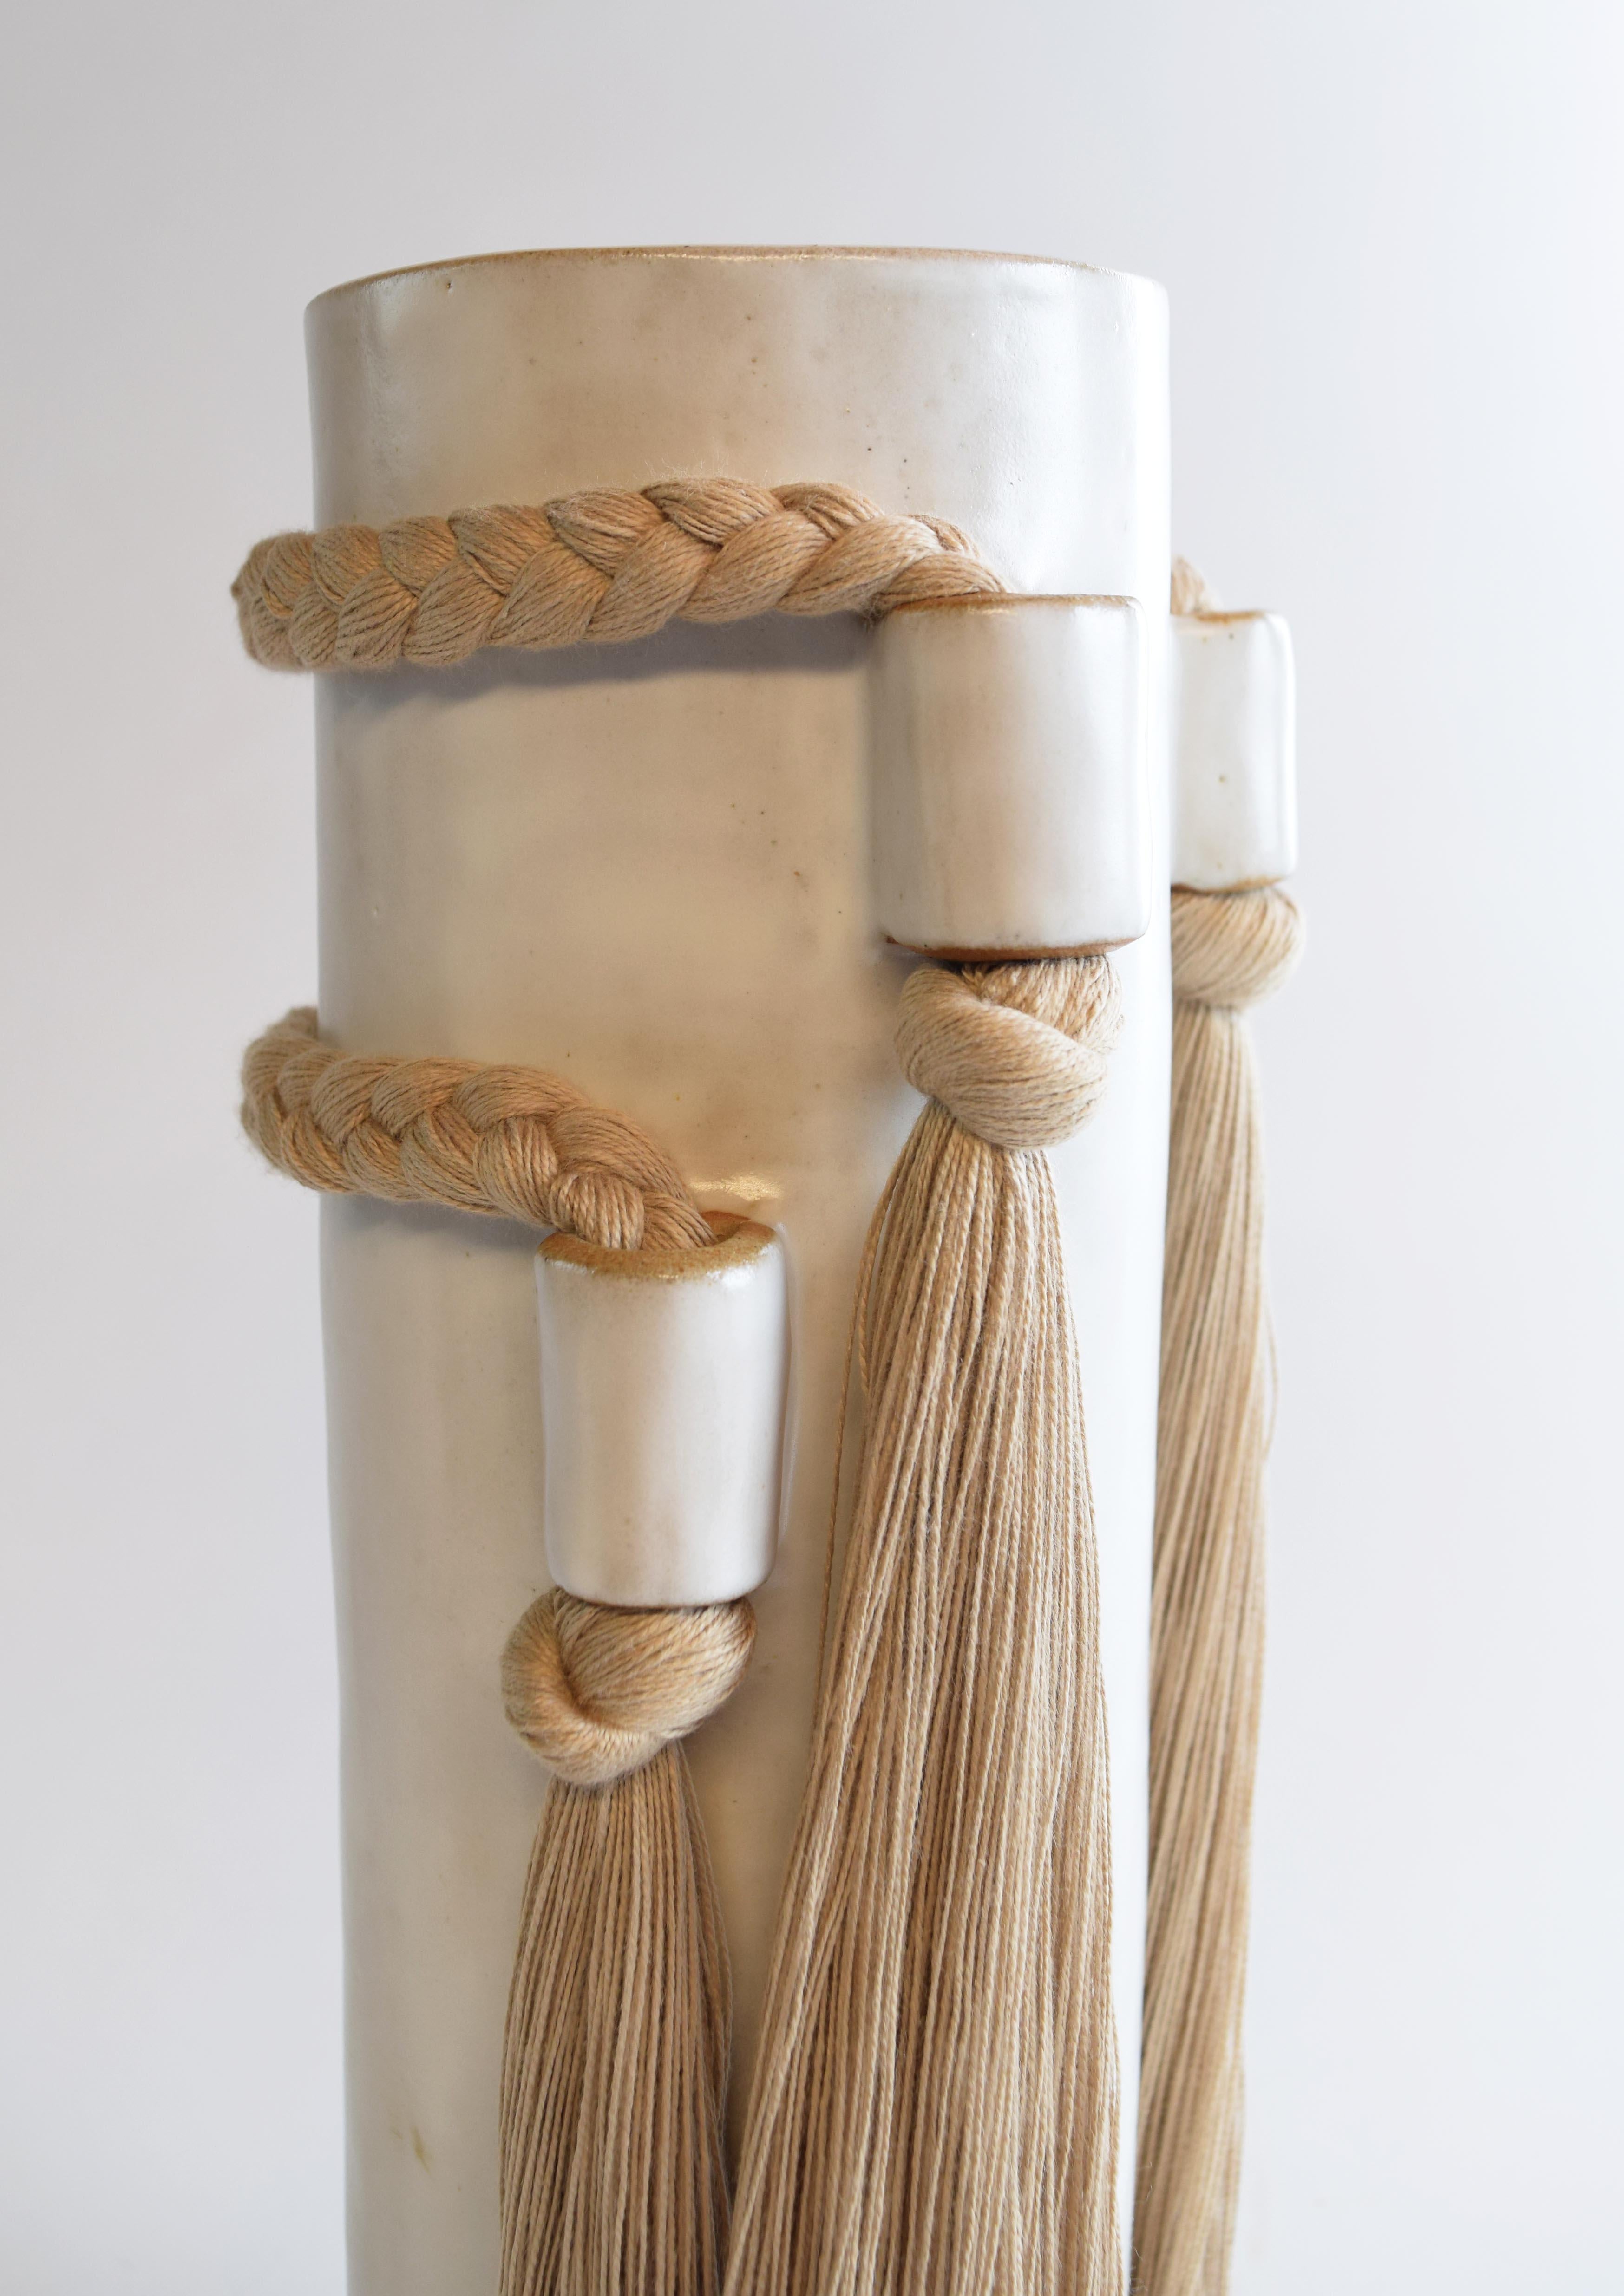 Hand-Knotted Handmade Ceramic Vase #735 in White with Tan Cotton Braided & Fringe Details For Sale